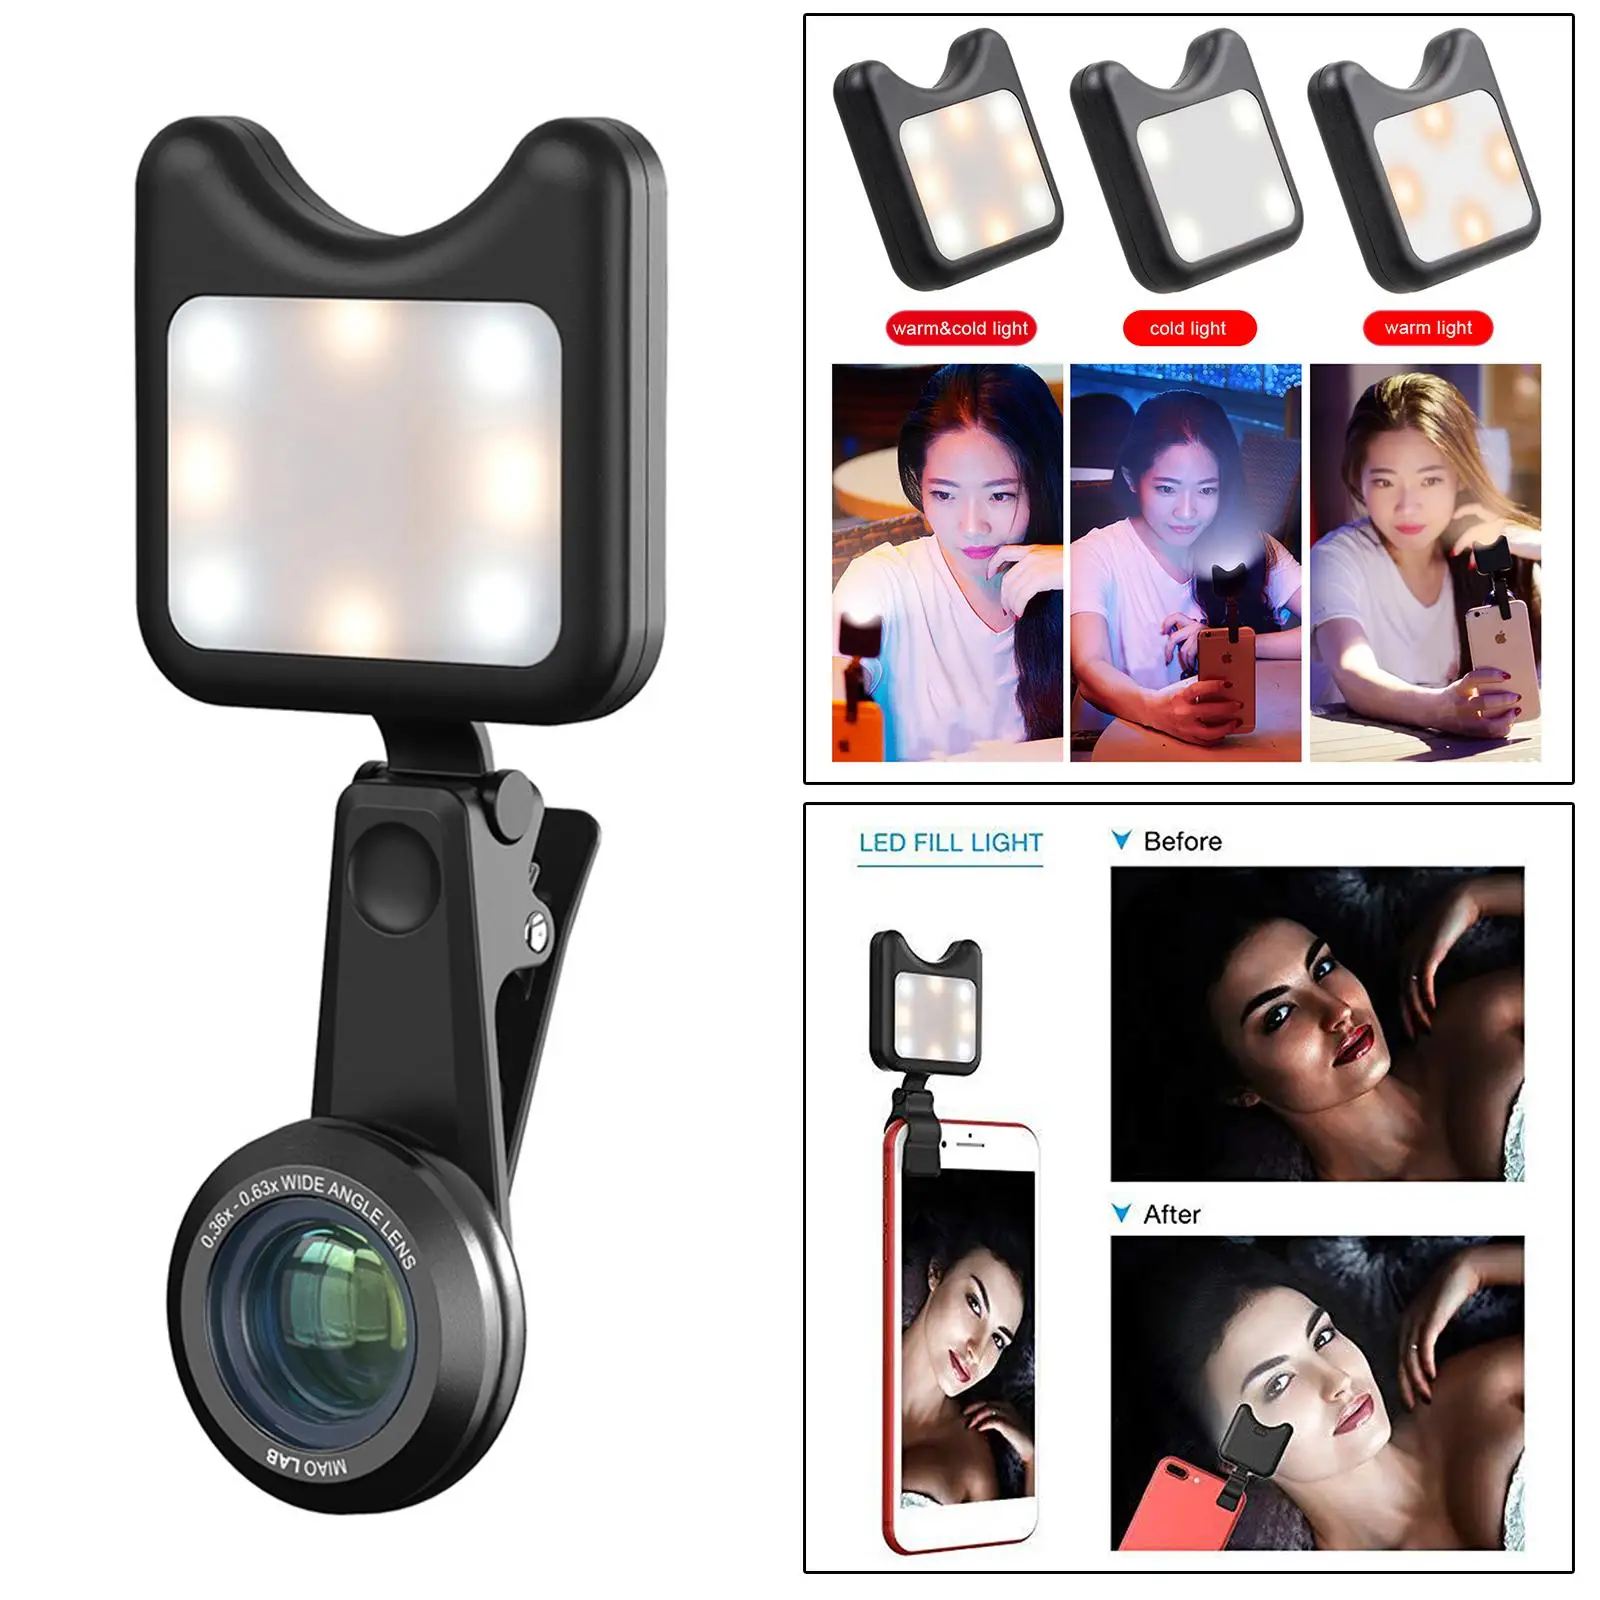  w/ 0.36 Angle Lens for Laptop Camera Video Portable for Any Cellphone Smartphone